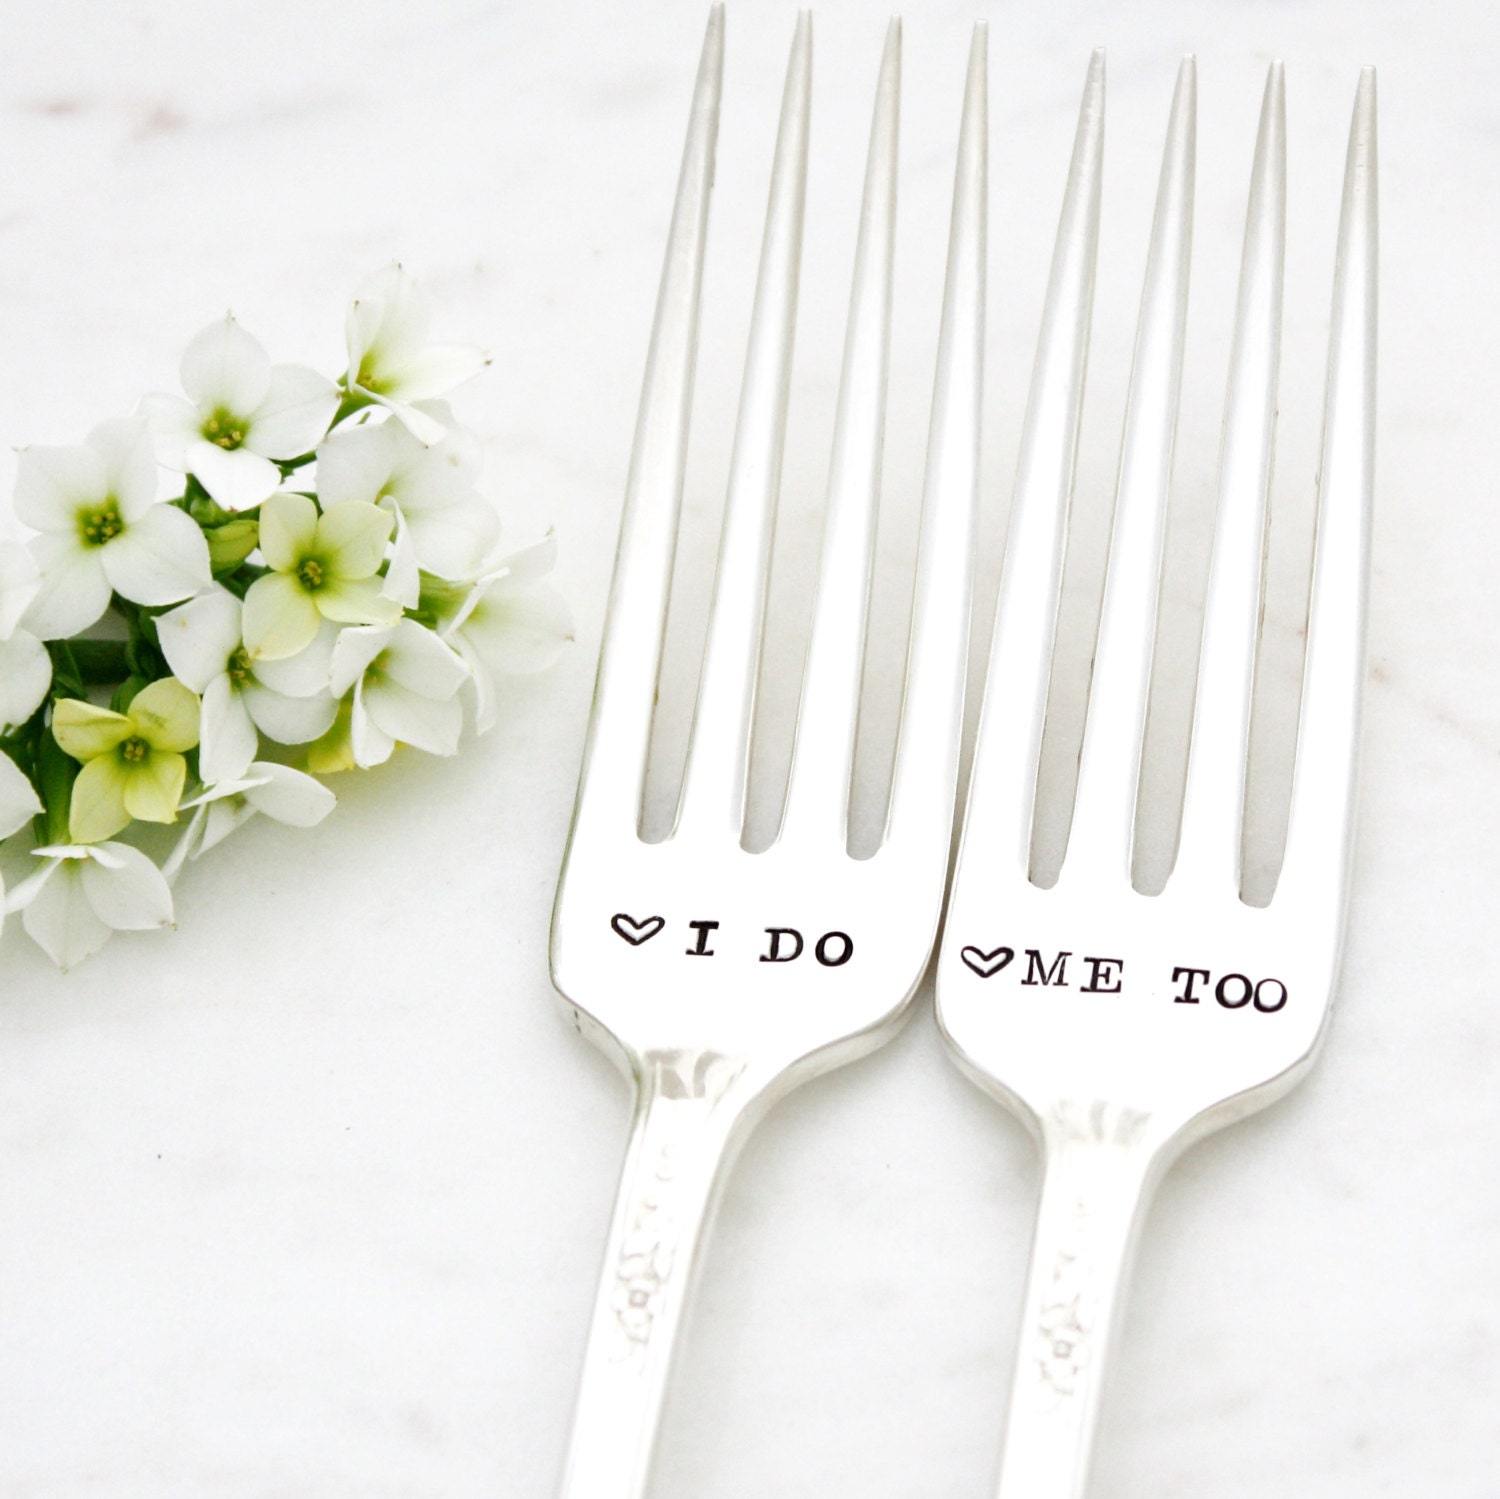 I do and Me Too silverware. Hand stamped wedding forks for unique engagement gift.